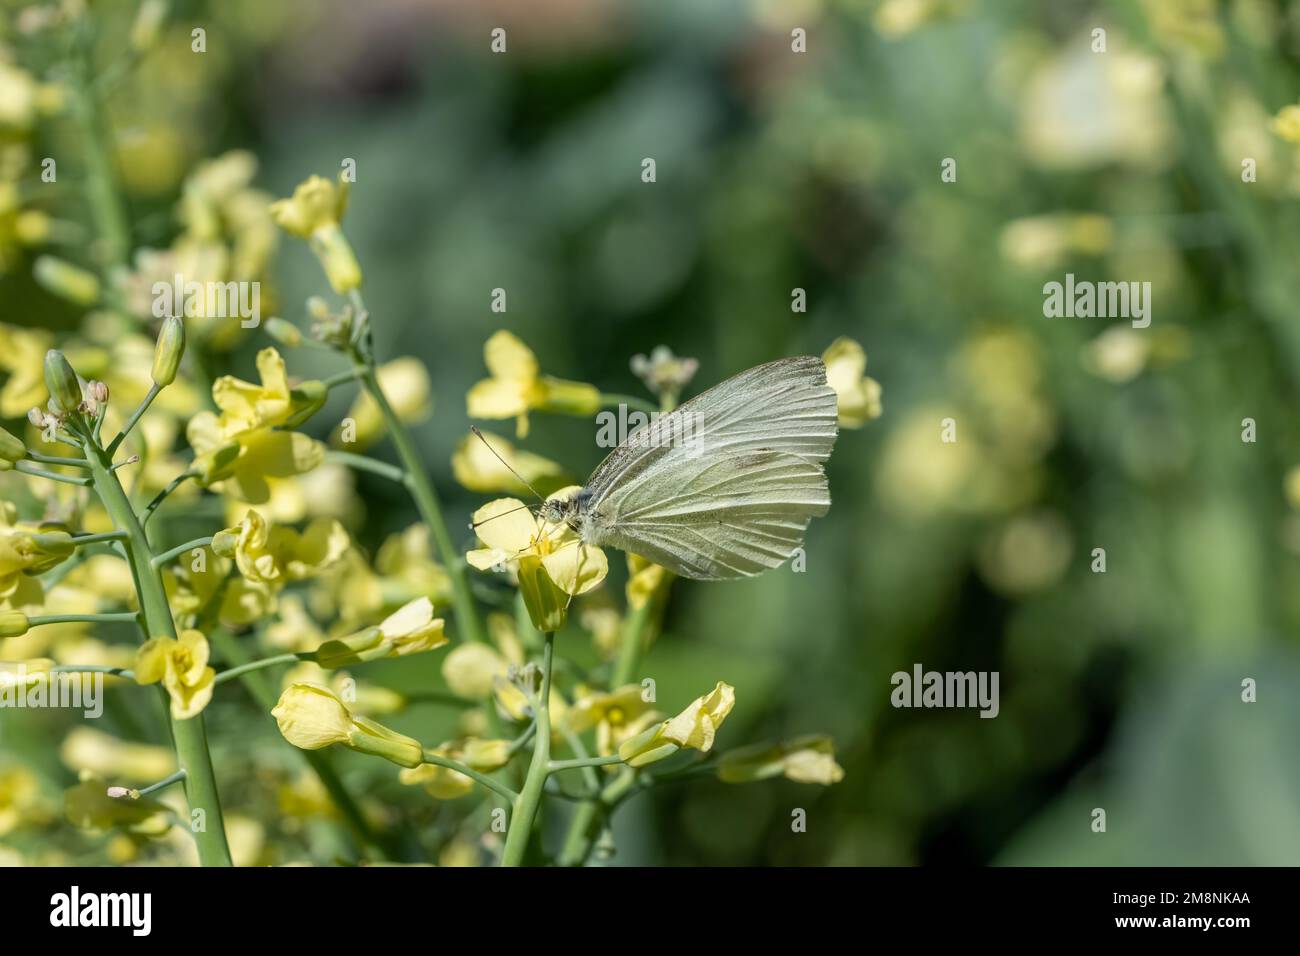 Issaquah, Washington, USA.   Broccoli plant gone to seed, with Cabbage White butterfly pollinating it. Stock Photo